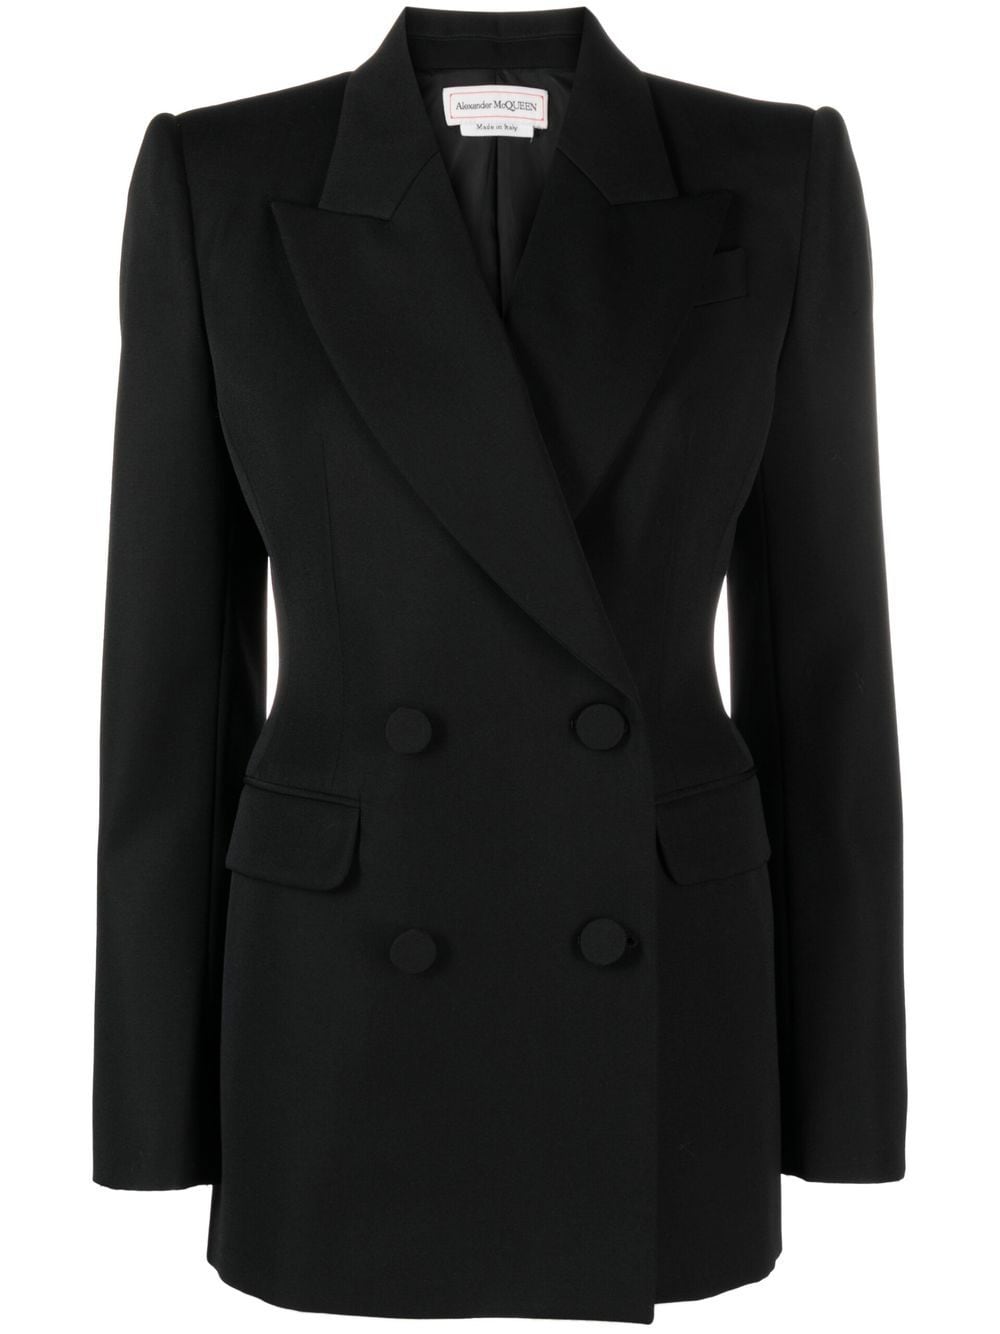 Image 1 of Alexander McQueen double-breasted wool blazer